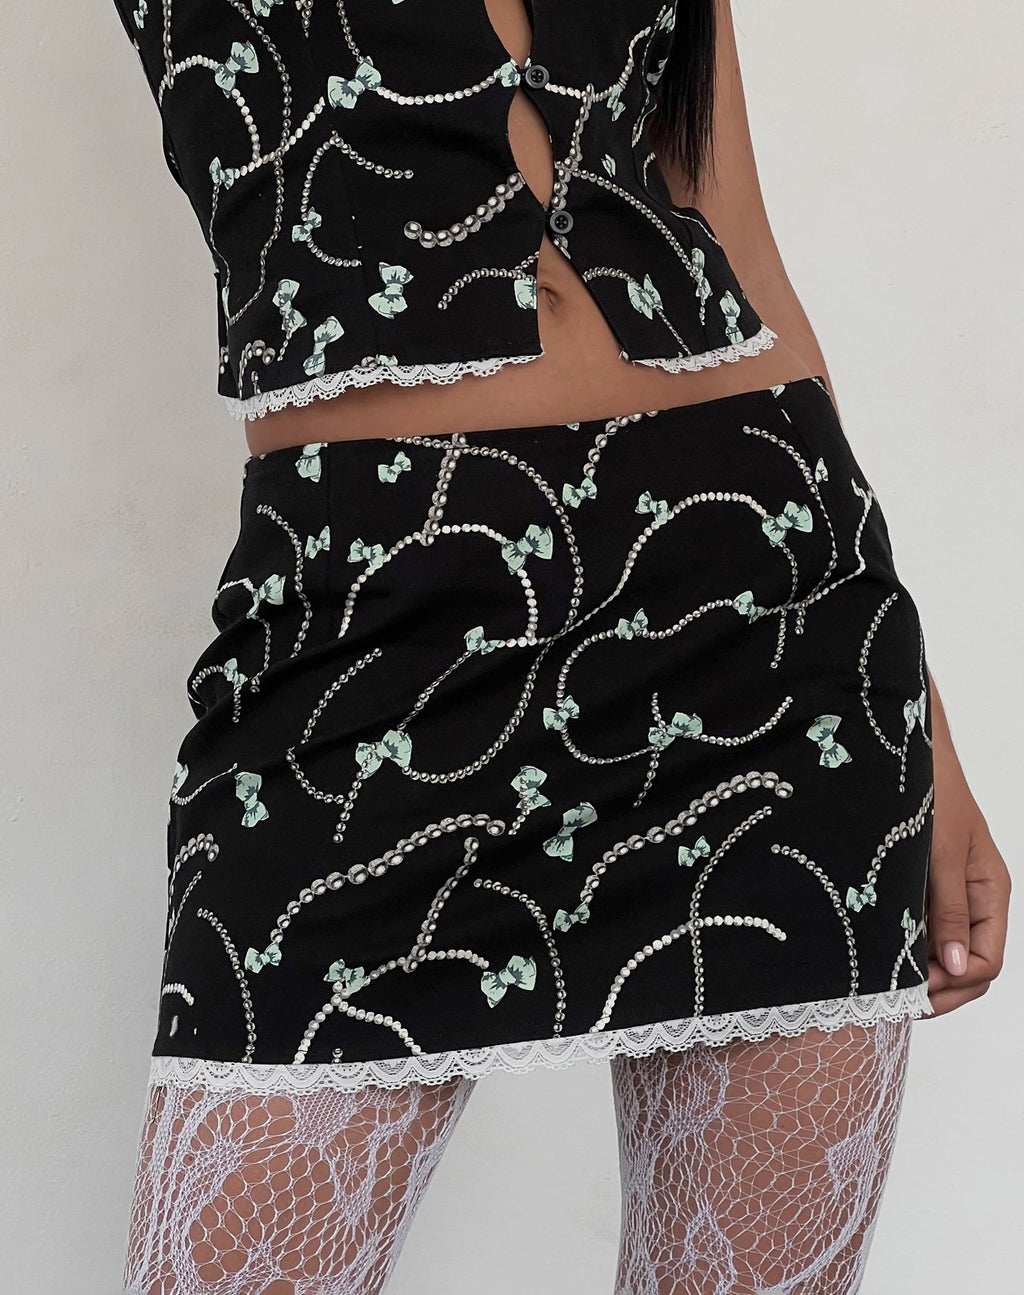 Molen Mini Skirt in Black with Pearl and Bow Print